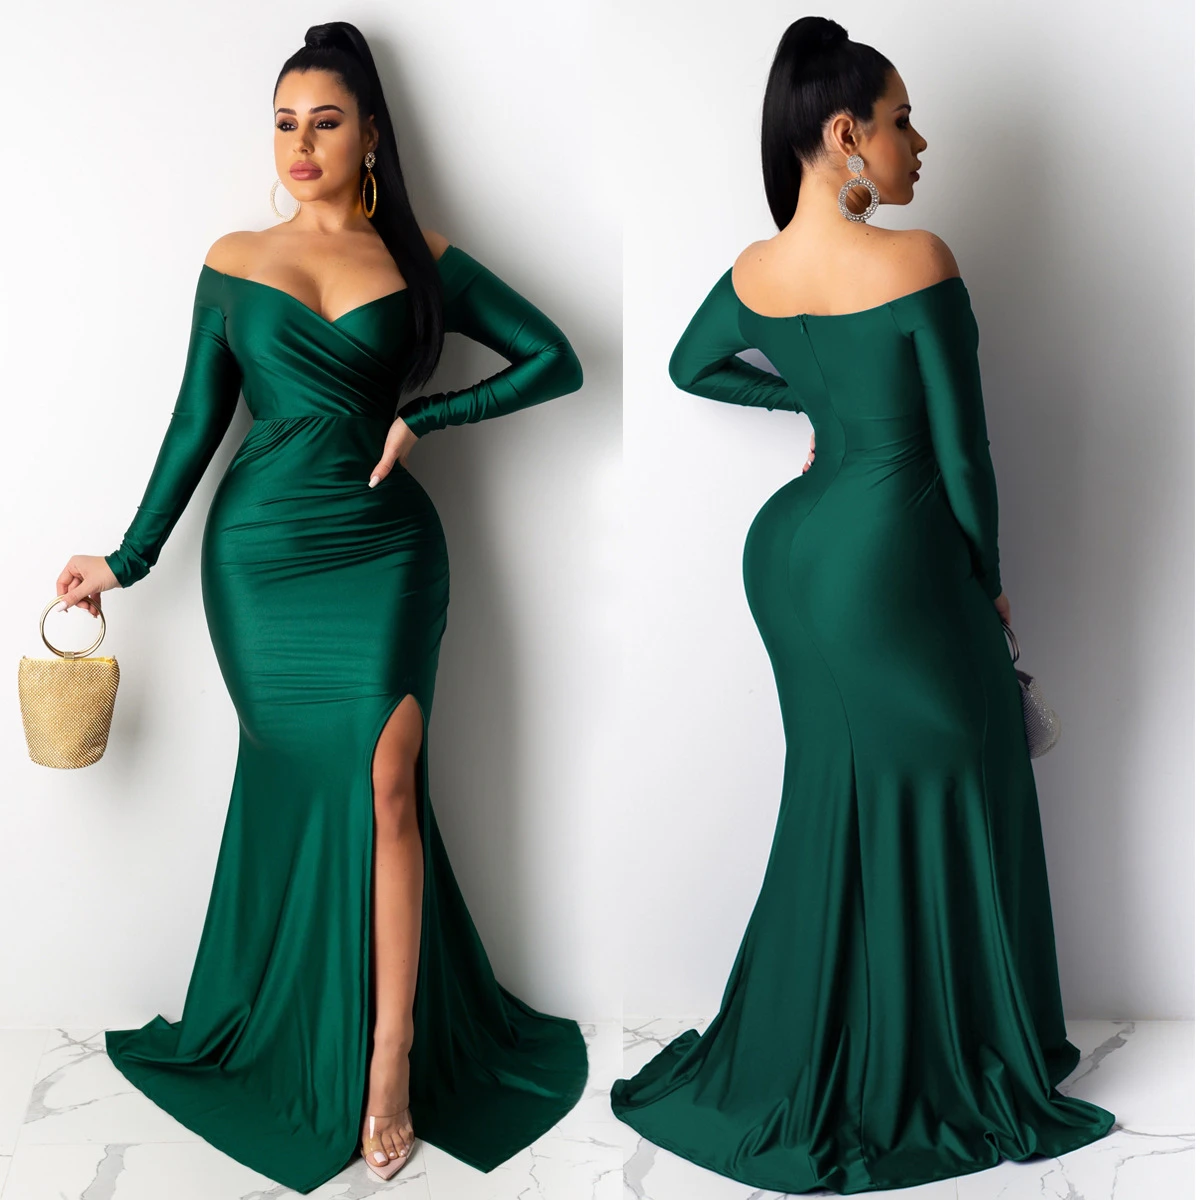 2021 Spring Long Sleeve One Shoulder Sexy Bodycon Formal Women&#x27;s Evening Dresses